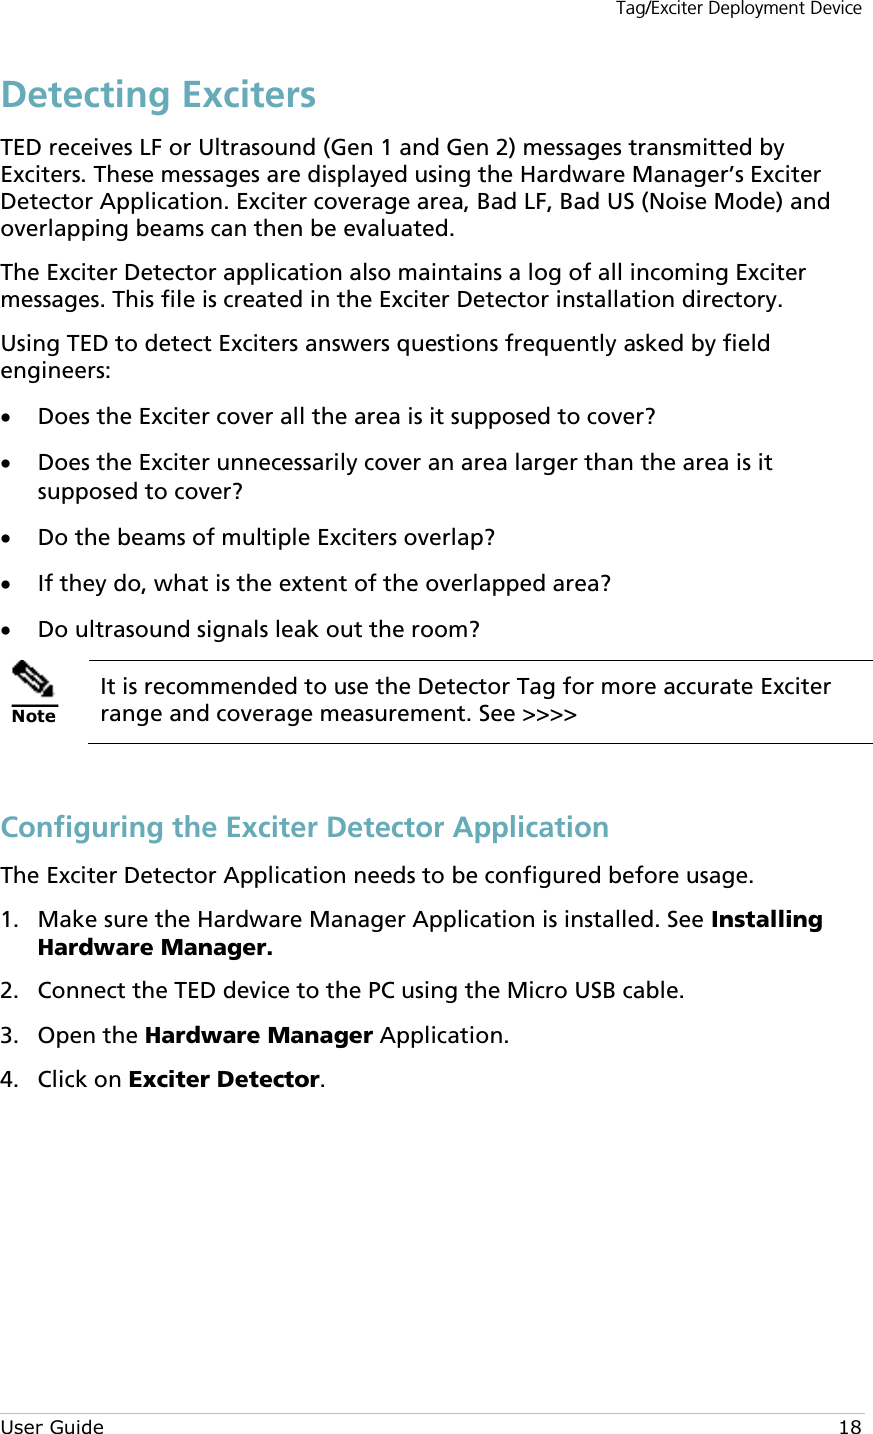 Tag/Exciter Deployment Device User Guide 18 Detecting Exciters TED receives LF or Ultrasound (Gen 1 and Gen 2) messages transmitted by Exciters. These messages are displayed using the Hardware Manager’s Exciter Detector Application. Exciter coverage area, Bad LF, Bad US (Noise Mode) and overlapping beams can then be evaluated.  The Exciter Detector application also maintains a log of all incoming Exciter messages. This file is created in the Exciter Detector installation directory. Using TED to detect Exciters answers questions frequently asked by field engineers: • Does the Exciter cover all the area is it supposed to cover? • Does the Exciter unnecessarily cover an area larger than the area is it supposed to cover? • Do the beams of multiple Exciters overlap? • If they do, what is the extent of the overlapped area? • Do ultrasound signals leak out the room?  Note It is recommended to use the Detector Tag for more accurate Exciter range and coverage measurement. See &gt;&gt;&gt;&gt;  Configuring the Exciter Detector Application The Exciter Detector Application needs to be configured before usage.  Make sure the Hardware Manager Application is installed. See Installing 1.Hardware Manager.  Connect the TED device to the PC using the Micro USB cable. 2. Open the Hardware Manager Application. 3. Click on Exciter Detector.  4.